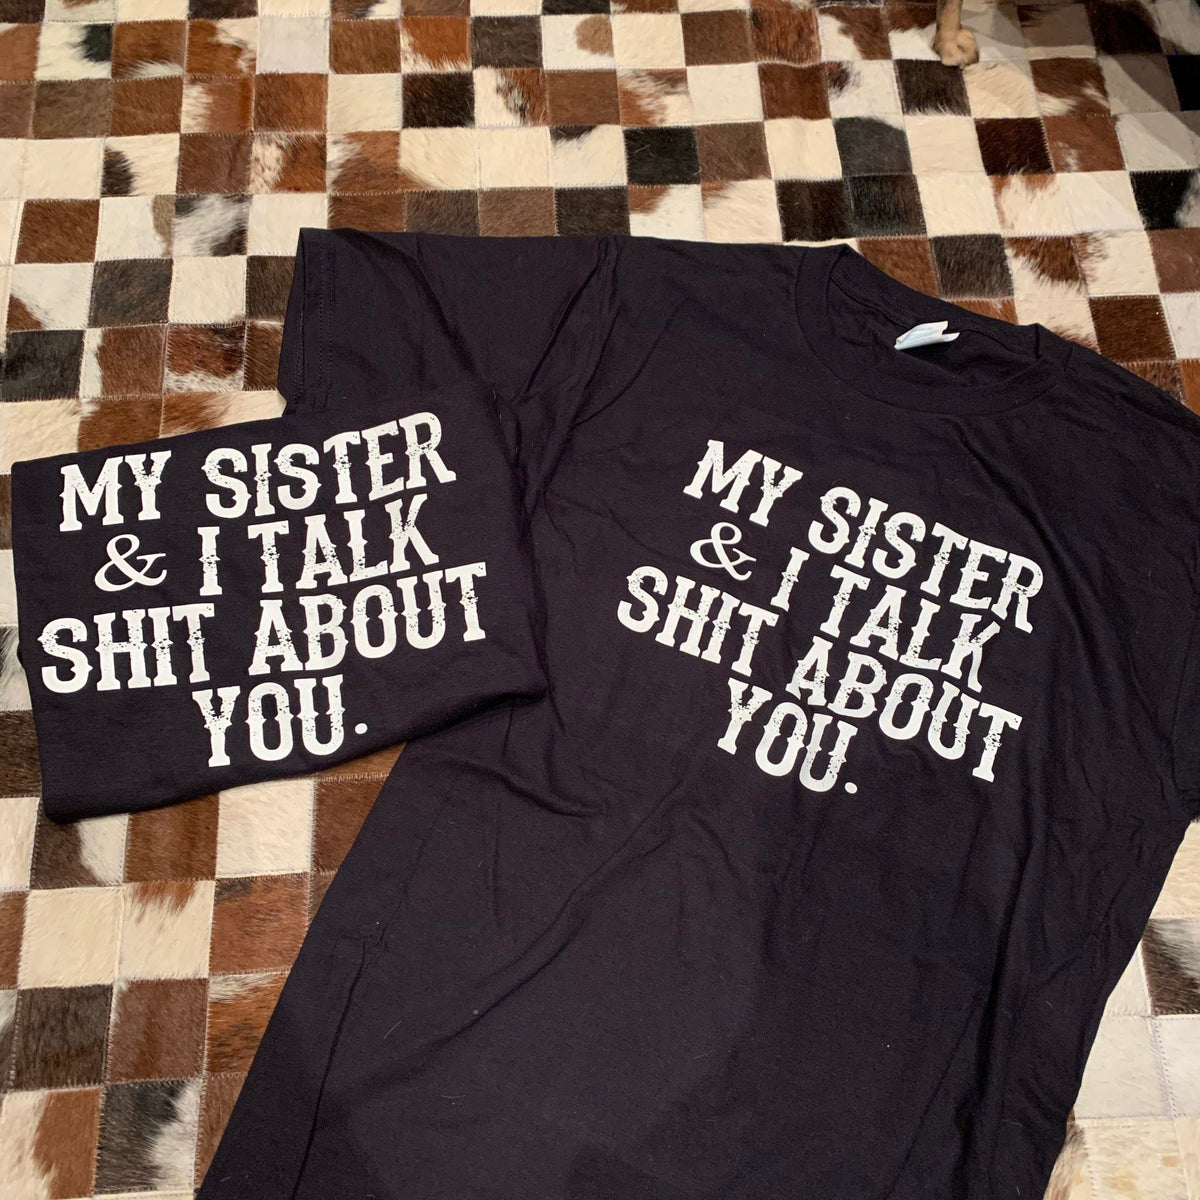 BLACK My sister and i talk shit about you tee Southwest Bedazzle Bargain bonanza